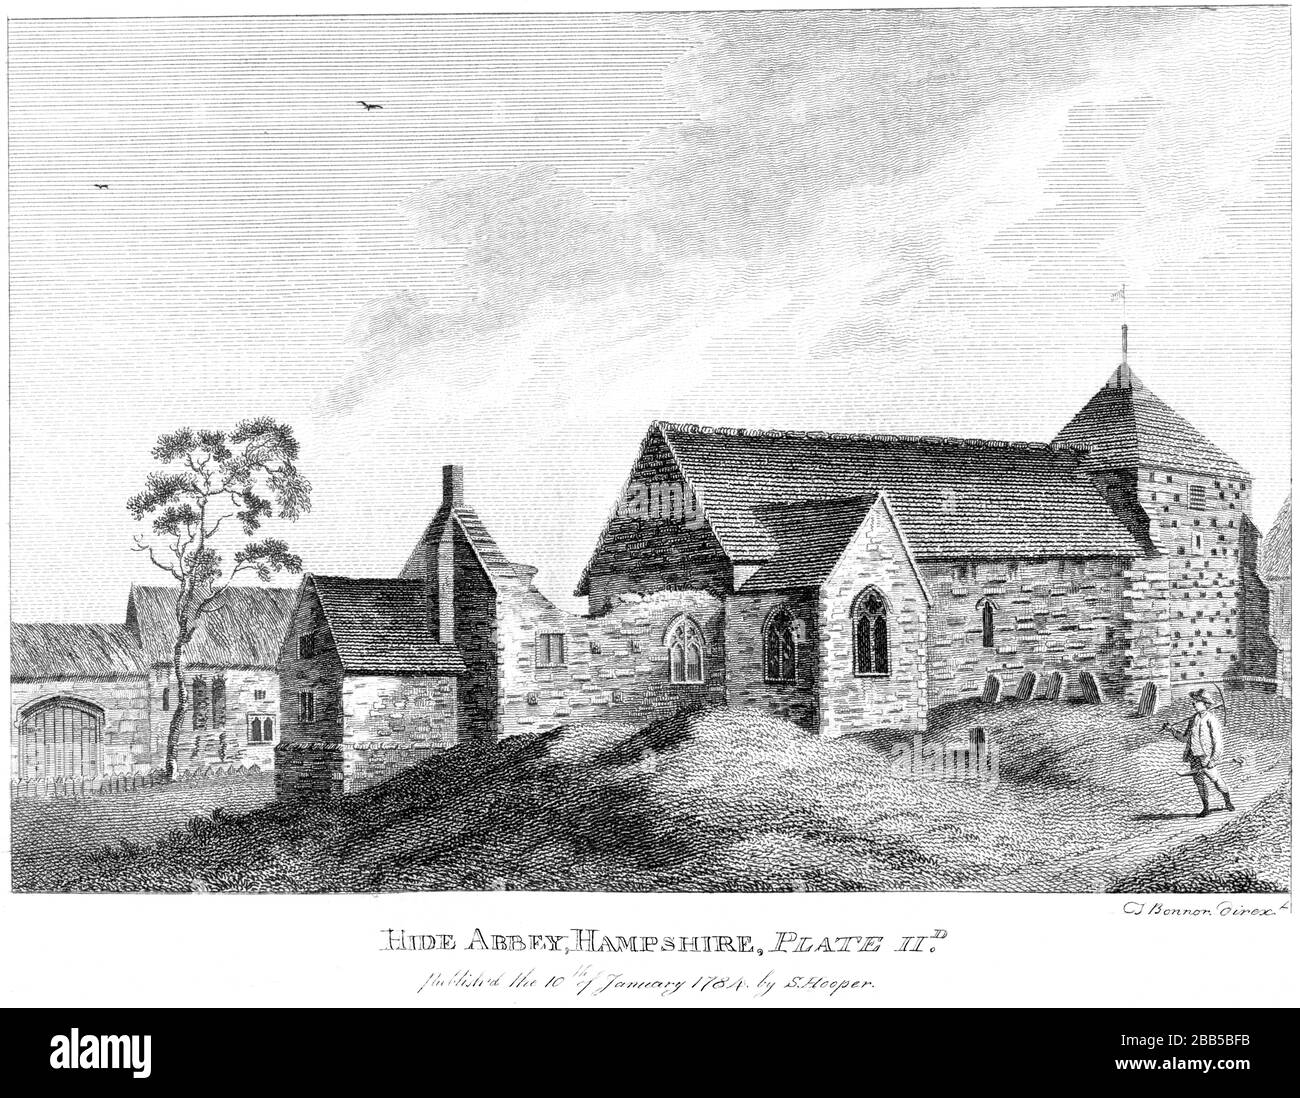 An engraving of Hide (Hyde) Abbey Hampshire 1784 scanned at high resolution from a book published around 1786. Believed copyright free. Stock Photo